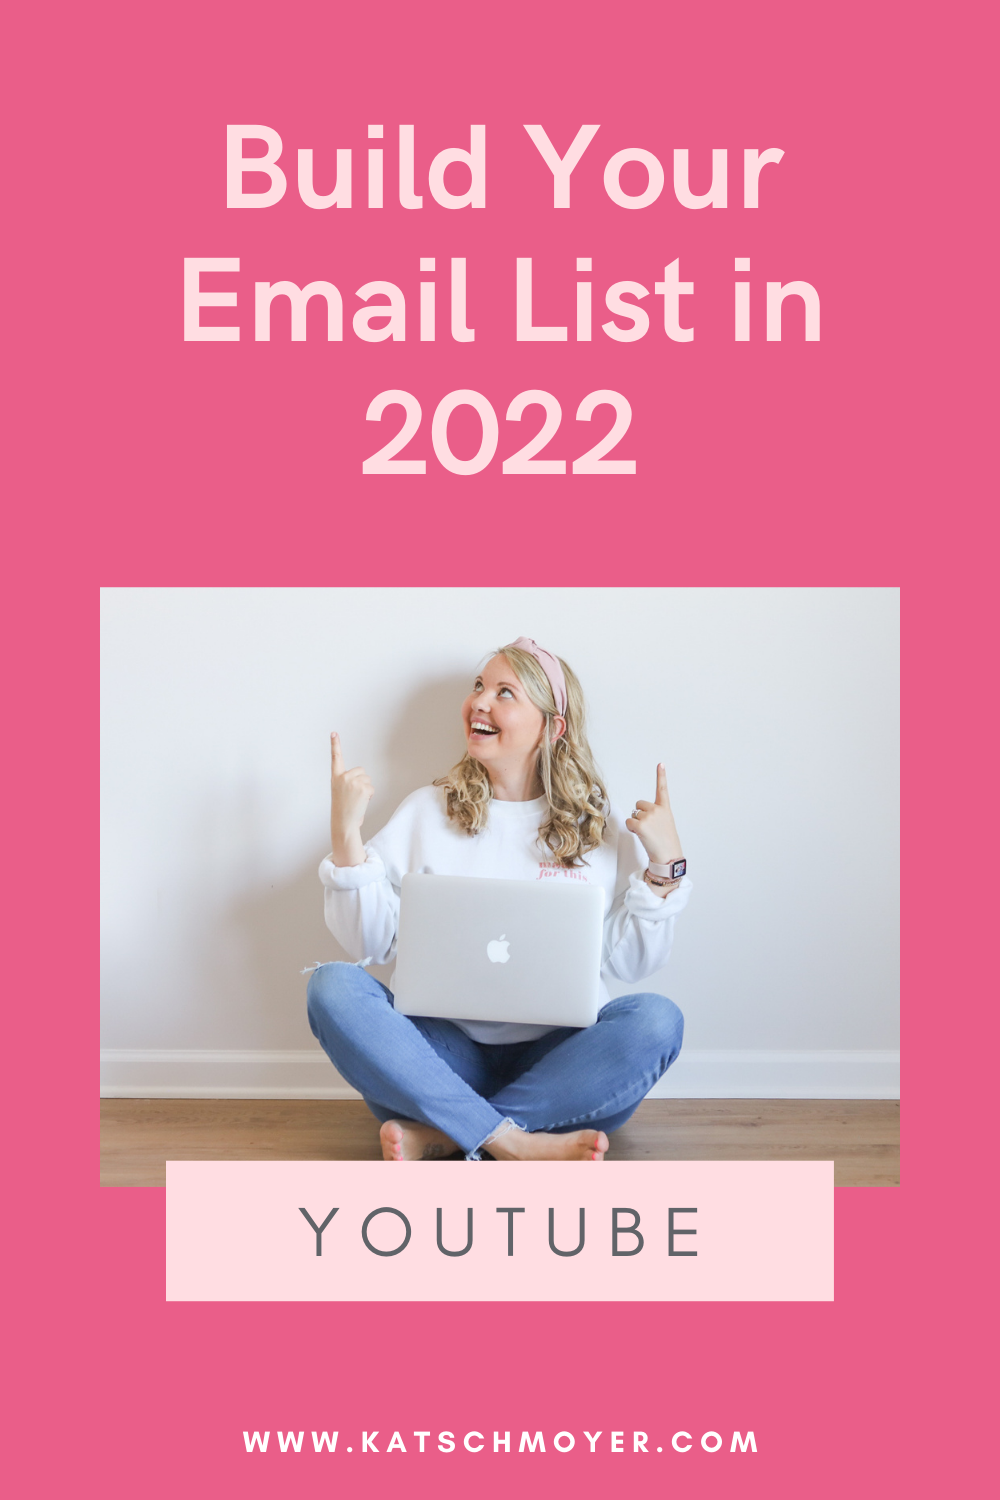 Build Your Email List in 2022